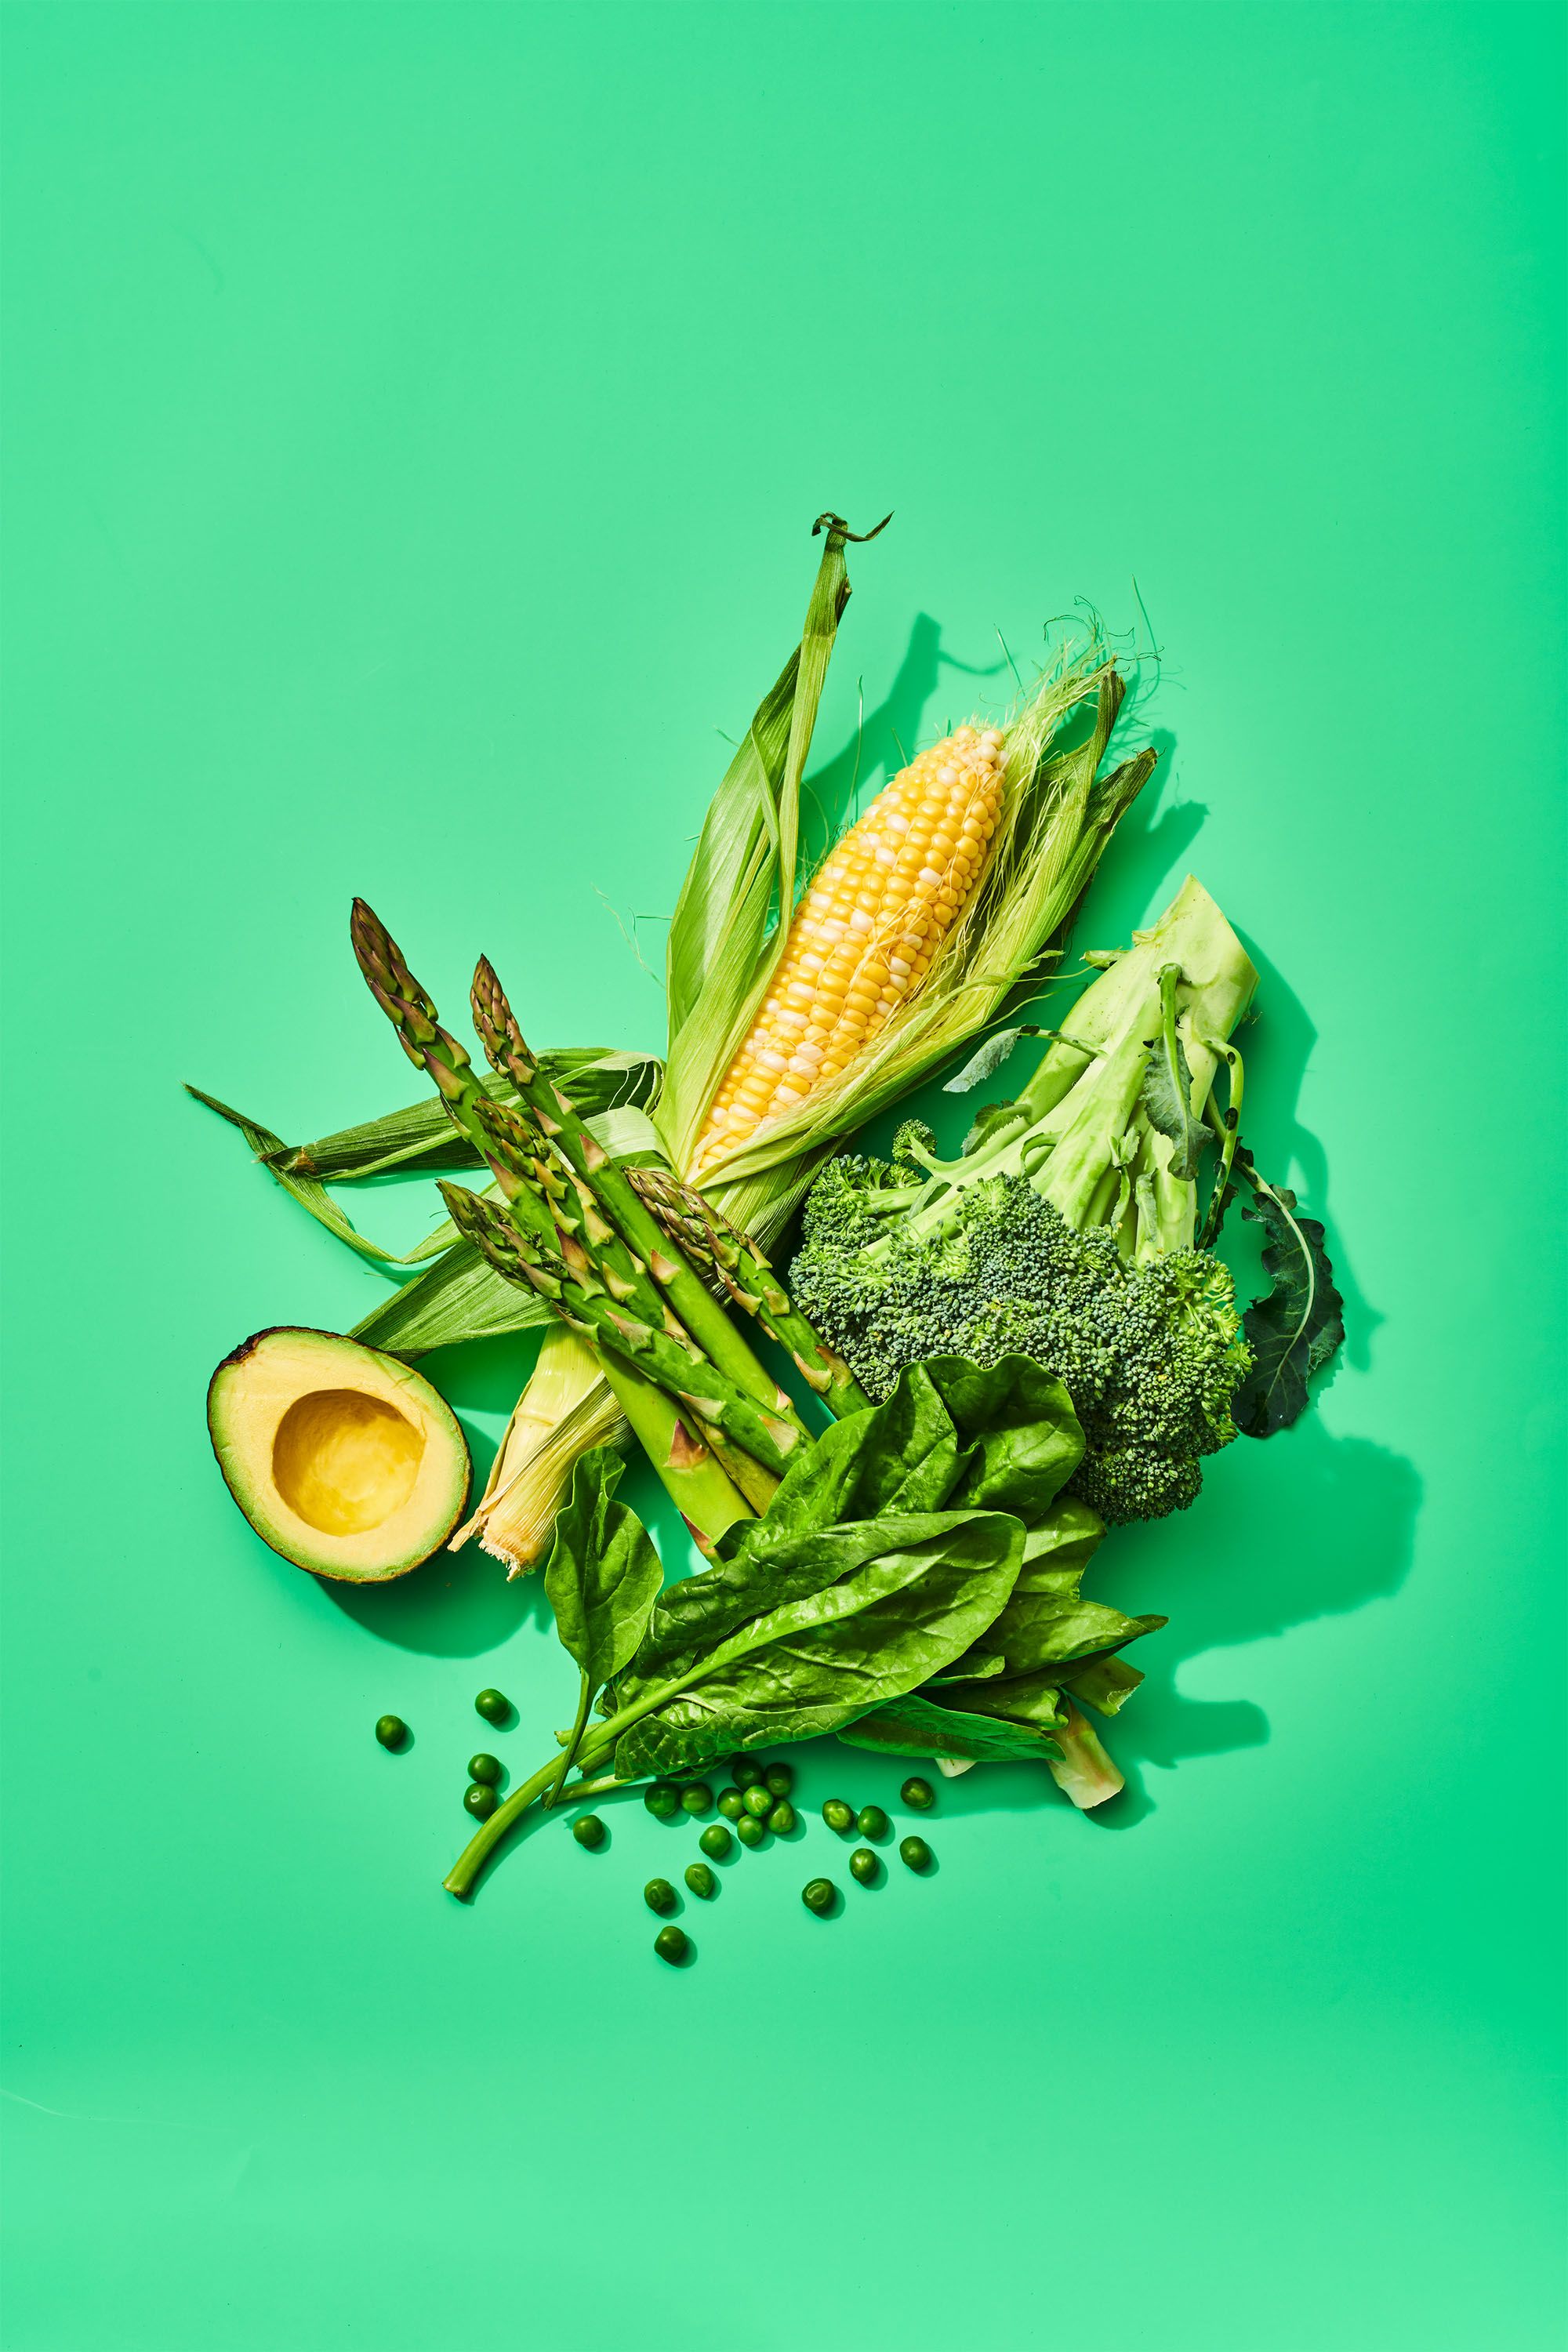 10 High-Protein Vegetables & Getting Enough Protein From Plants